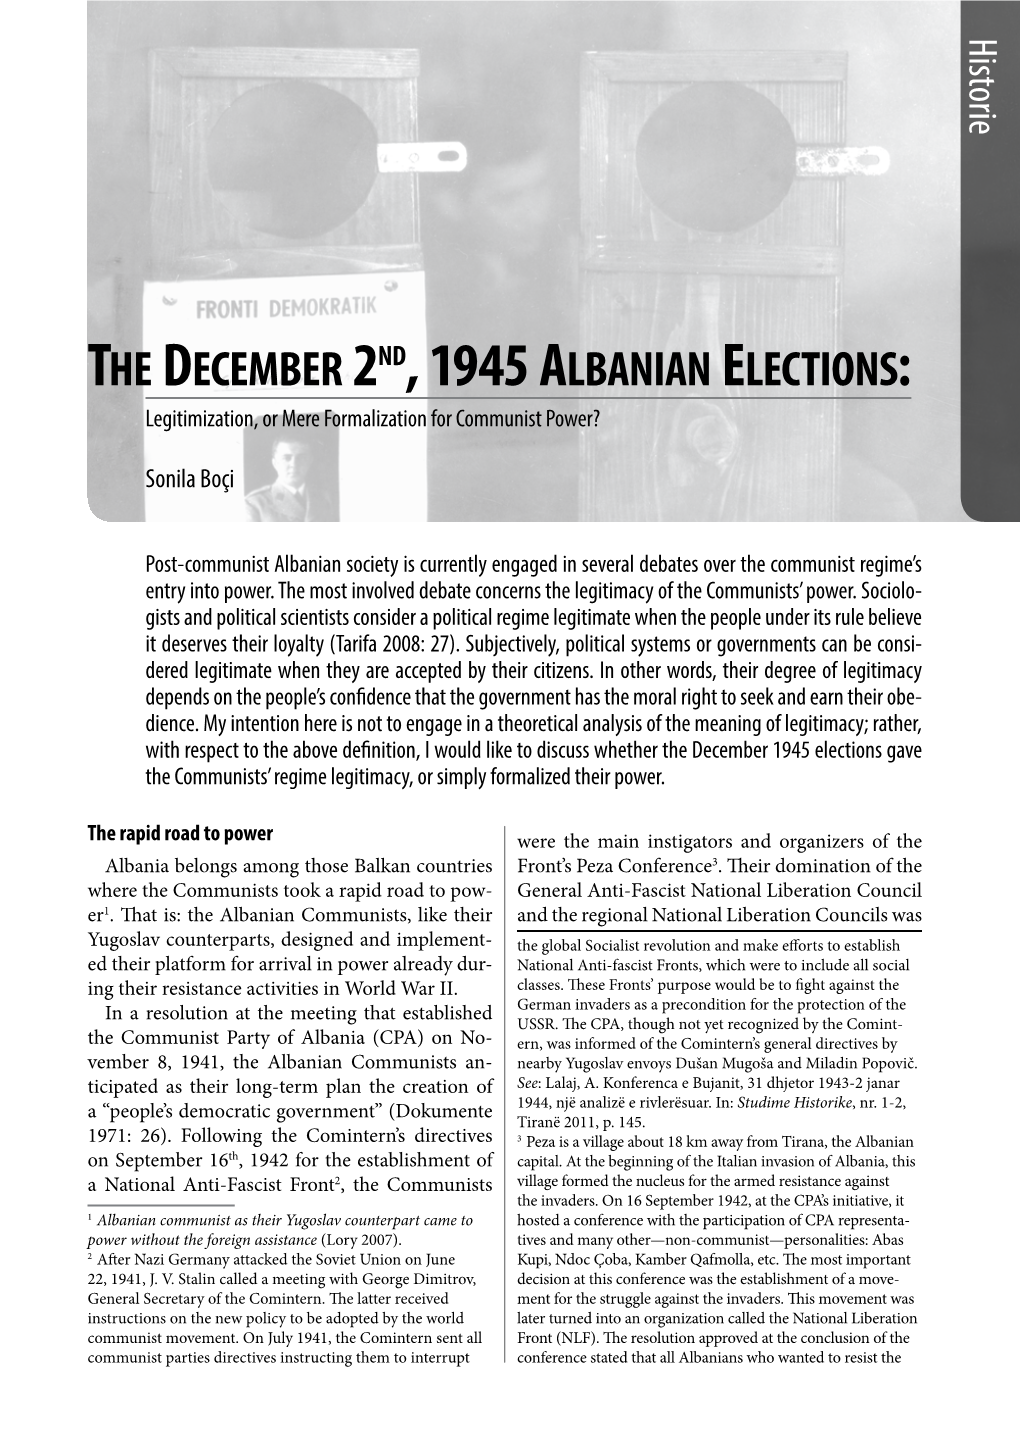 The December 2Nd, 1945 Albanian Elections: Legitimization, Or Mere Formalization for Communist Power?